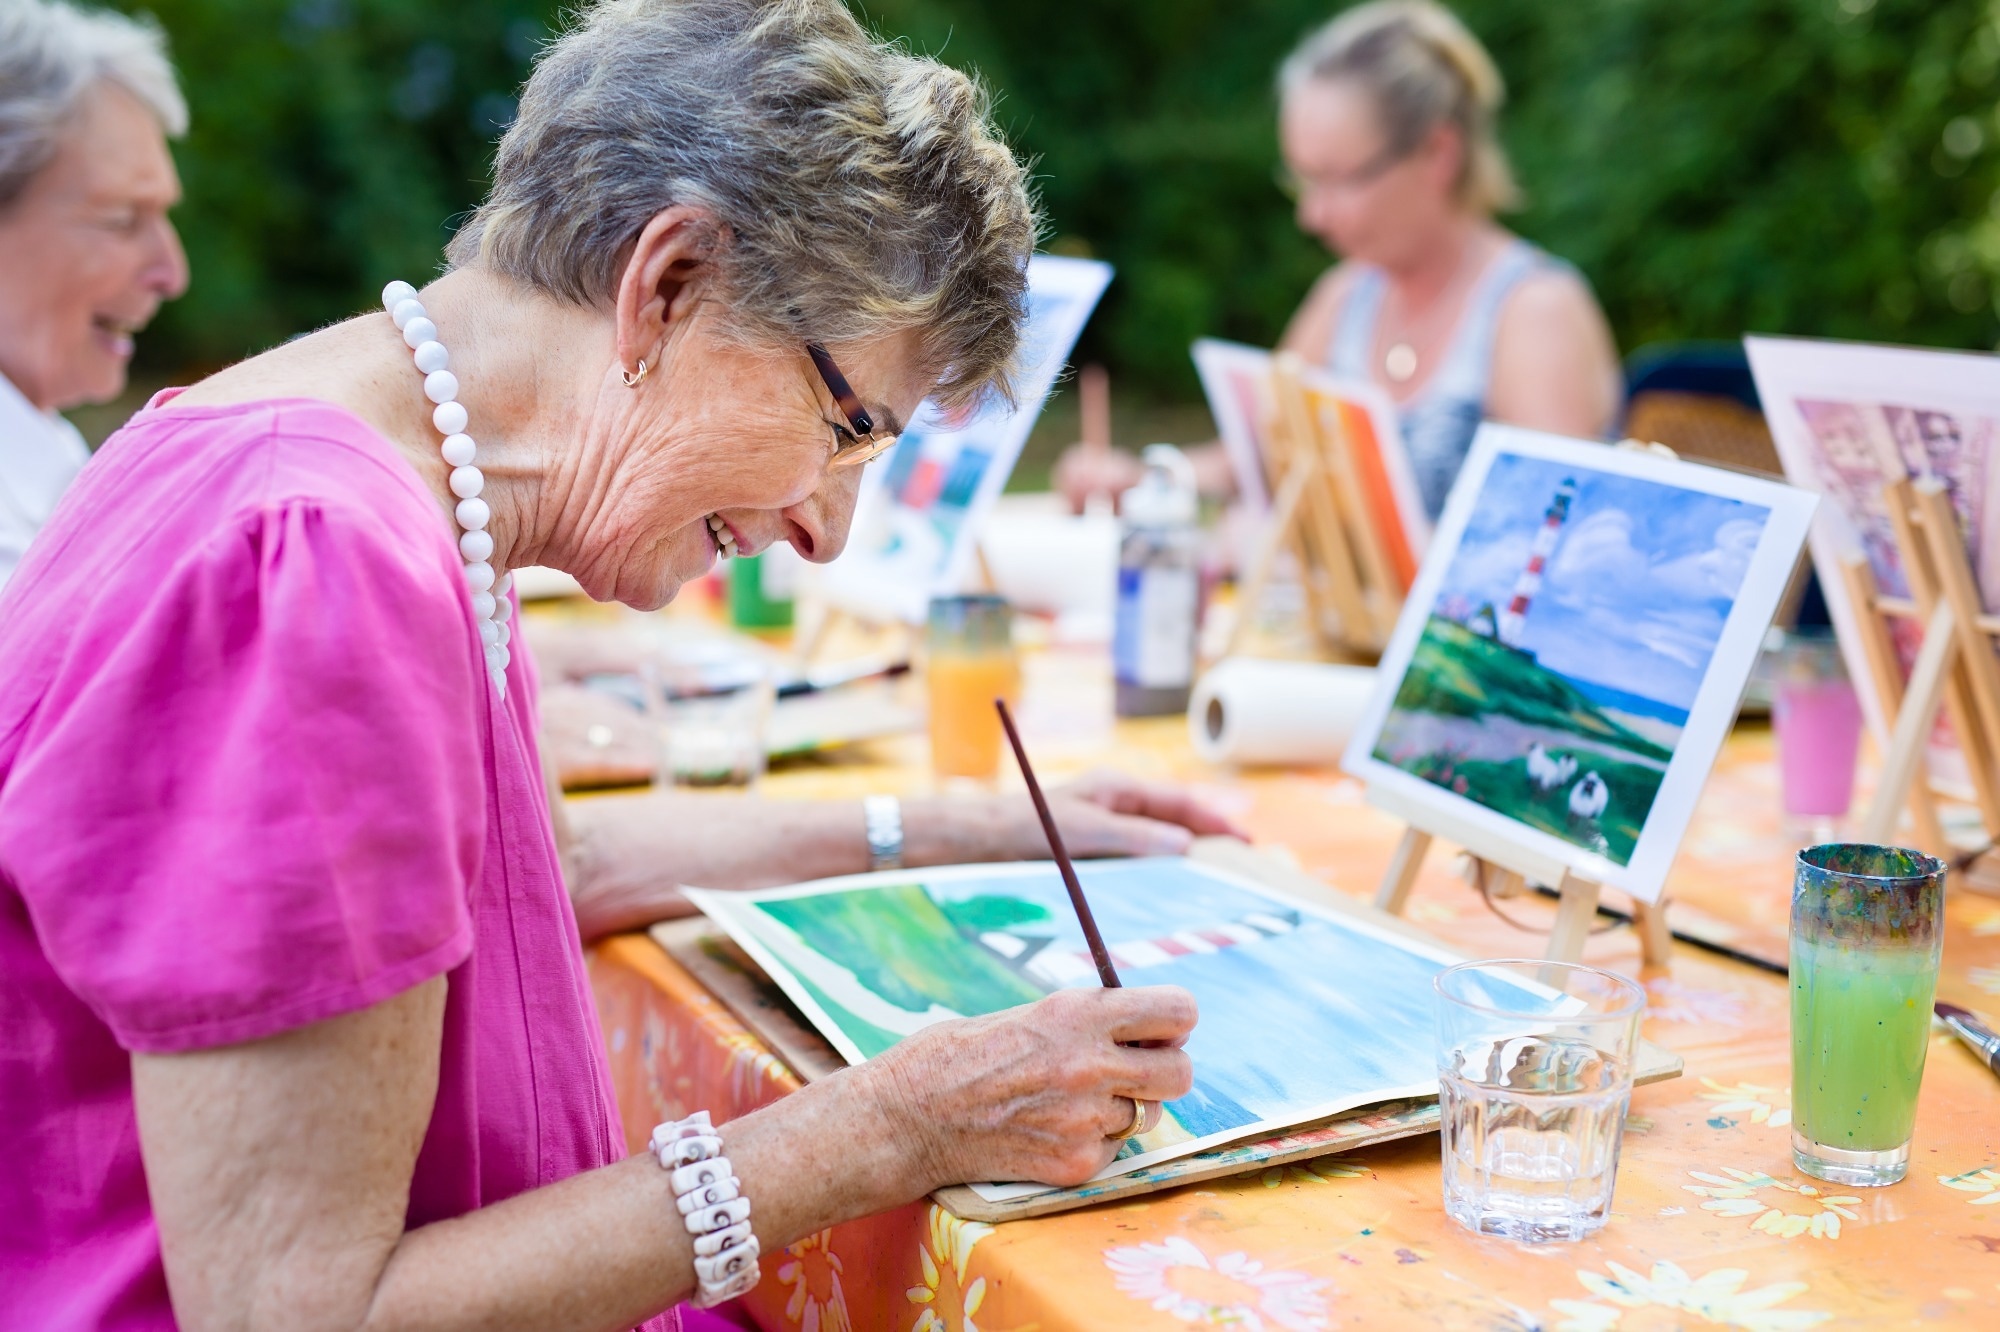 Study: Lifestyle Enrichment in Later Life and Its Association With Dementia Risk. Image Credit: belushi / Shutterstock.com